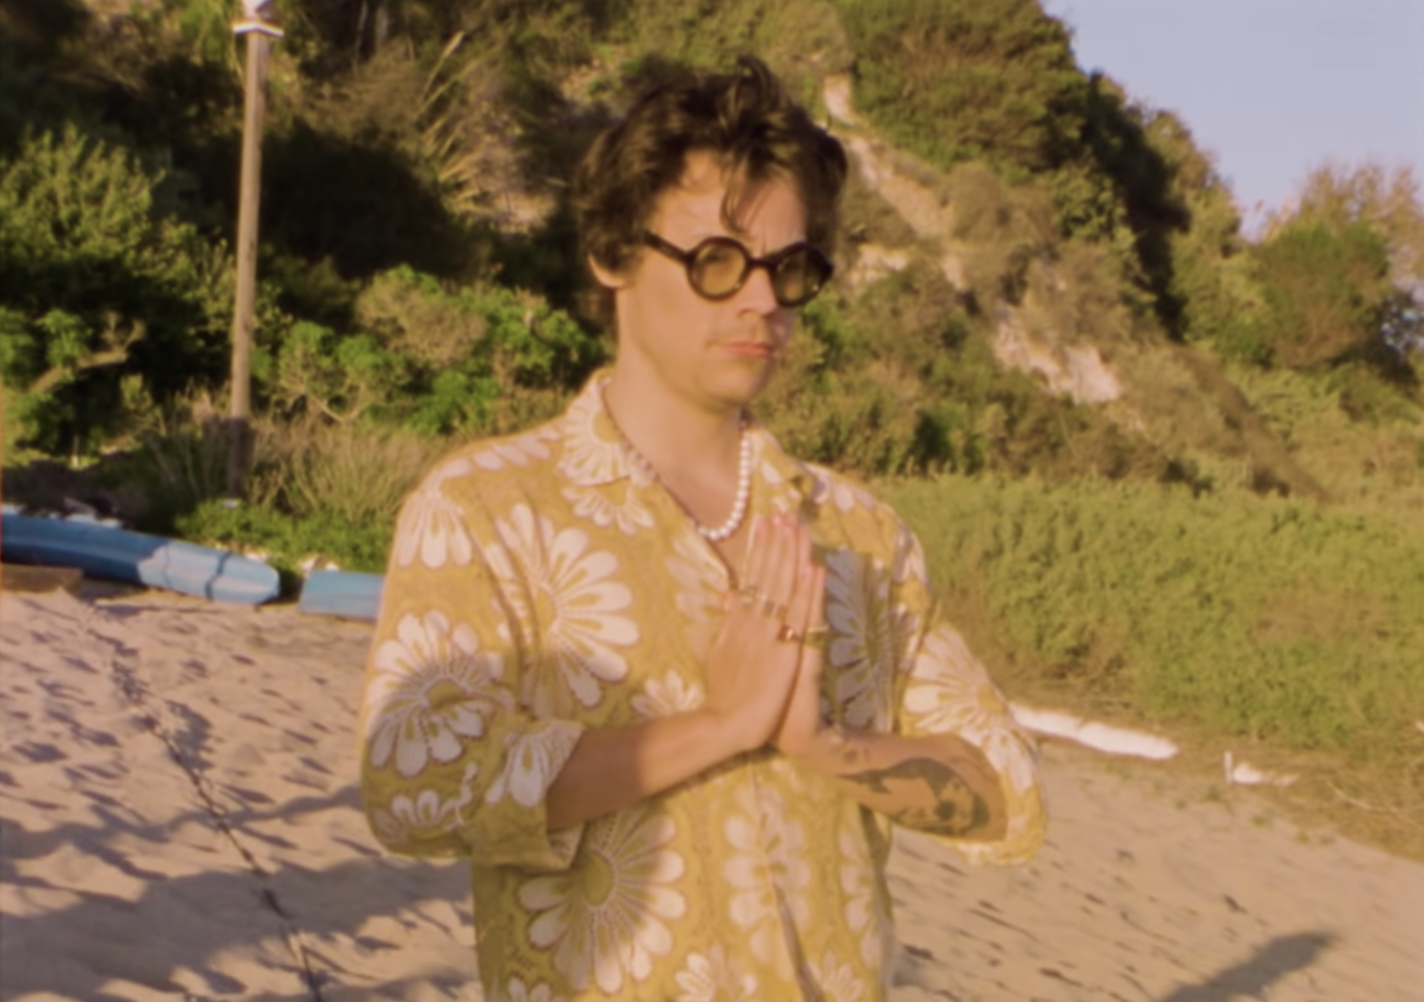 Harry meditation in-between takes while shooting the &quot;Watermelon Sugar&quot; music video